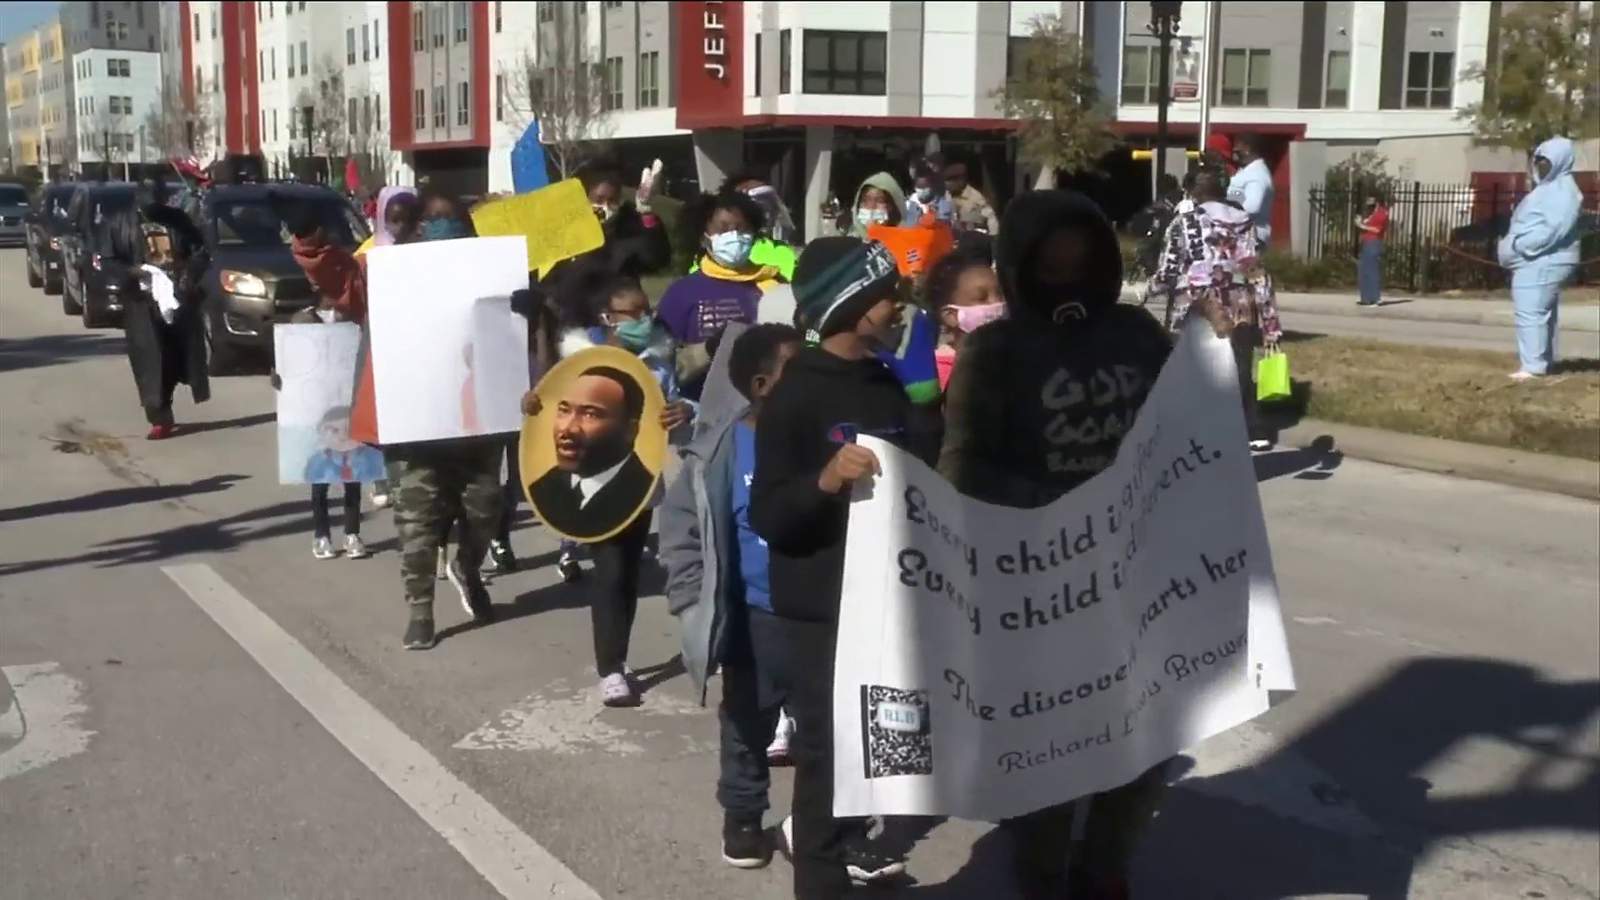 Jacksonville’s Dr. Martin Luther King Jr. Day Parade continues 4-decade tradition